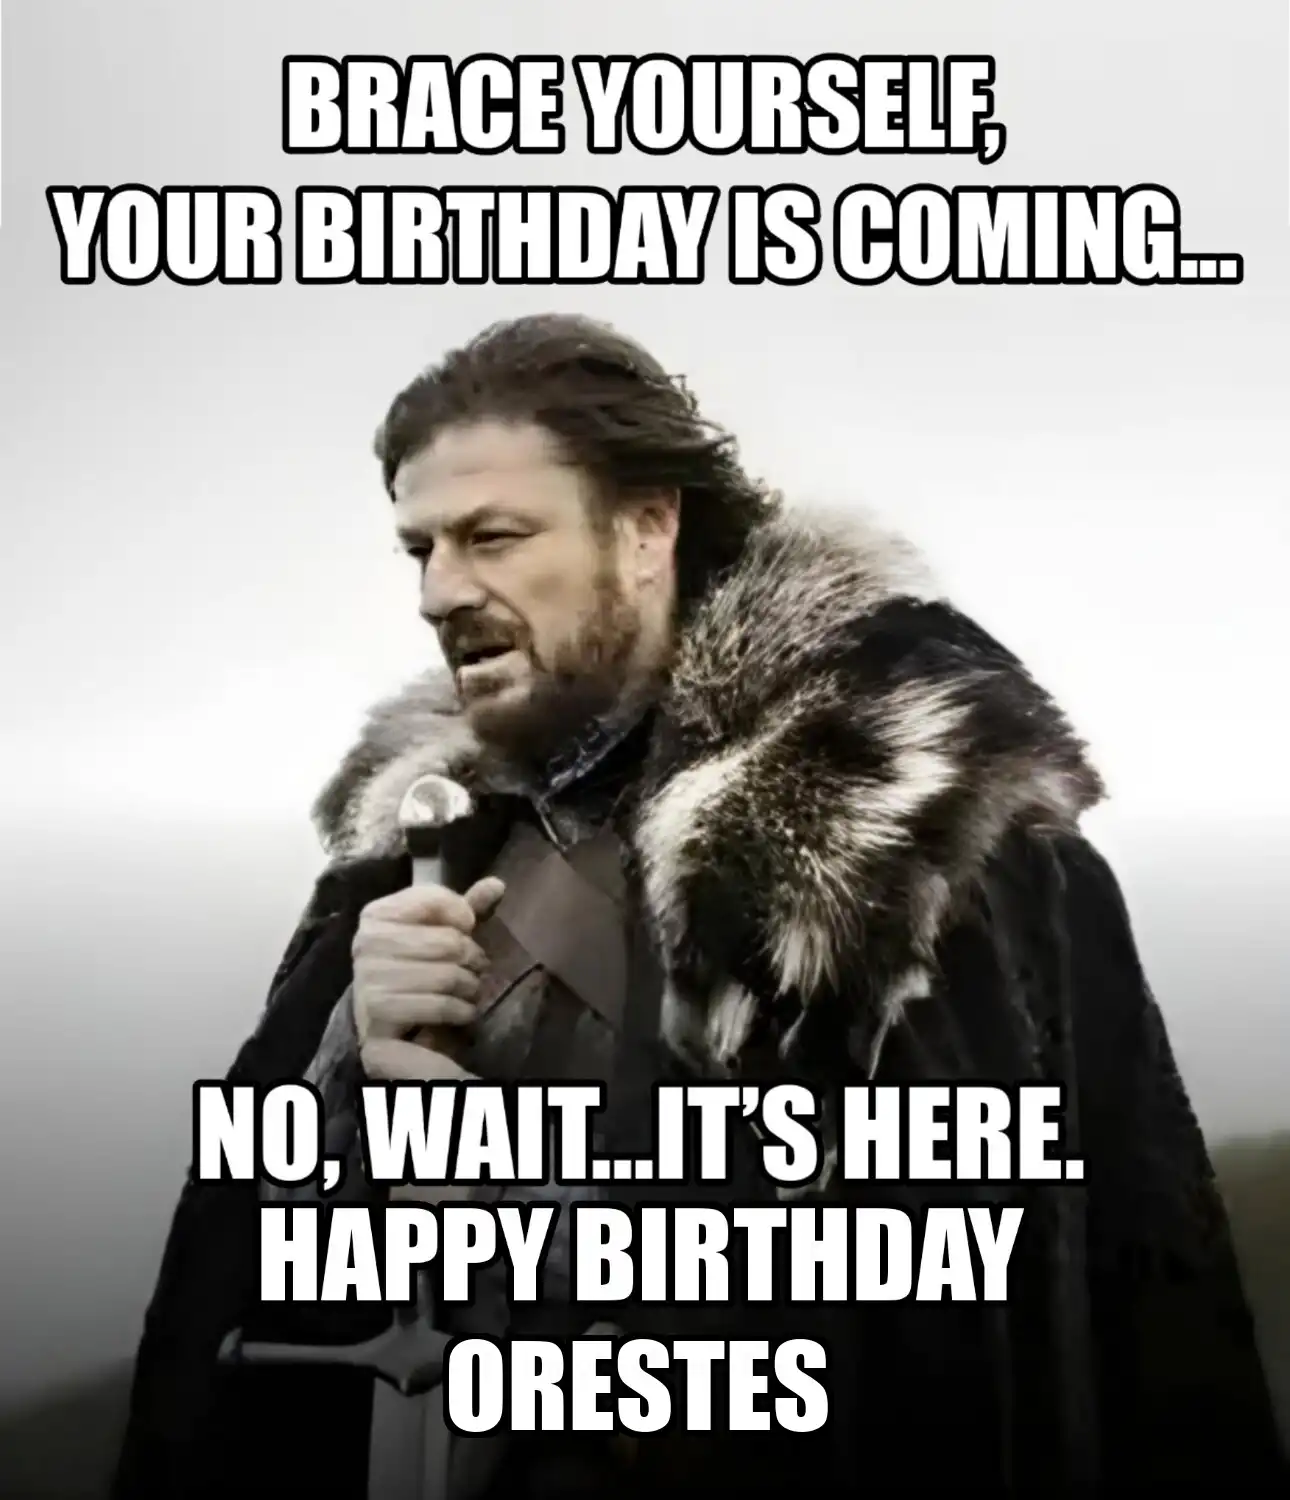 Happy Birthday Orestes Brace Yourself Your Birthday Is Coming Meme